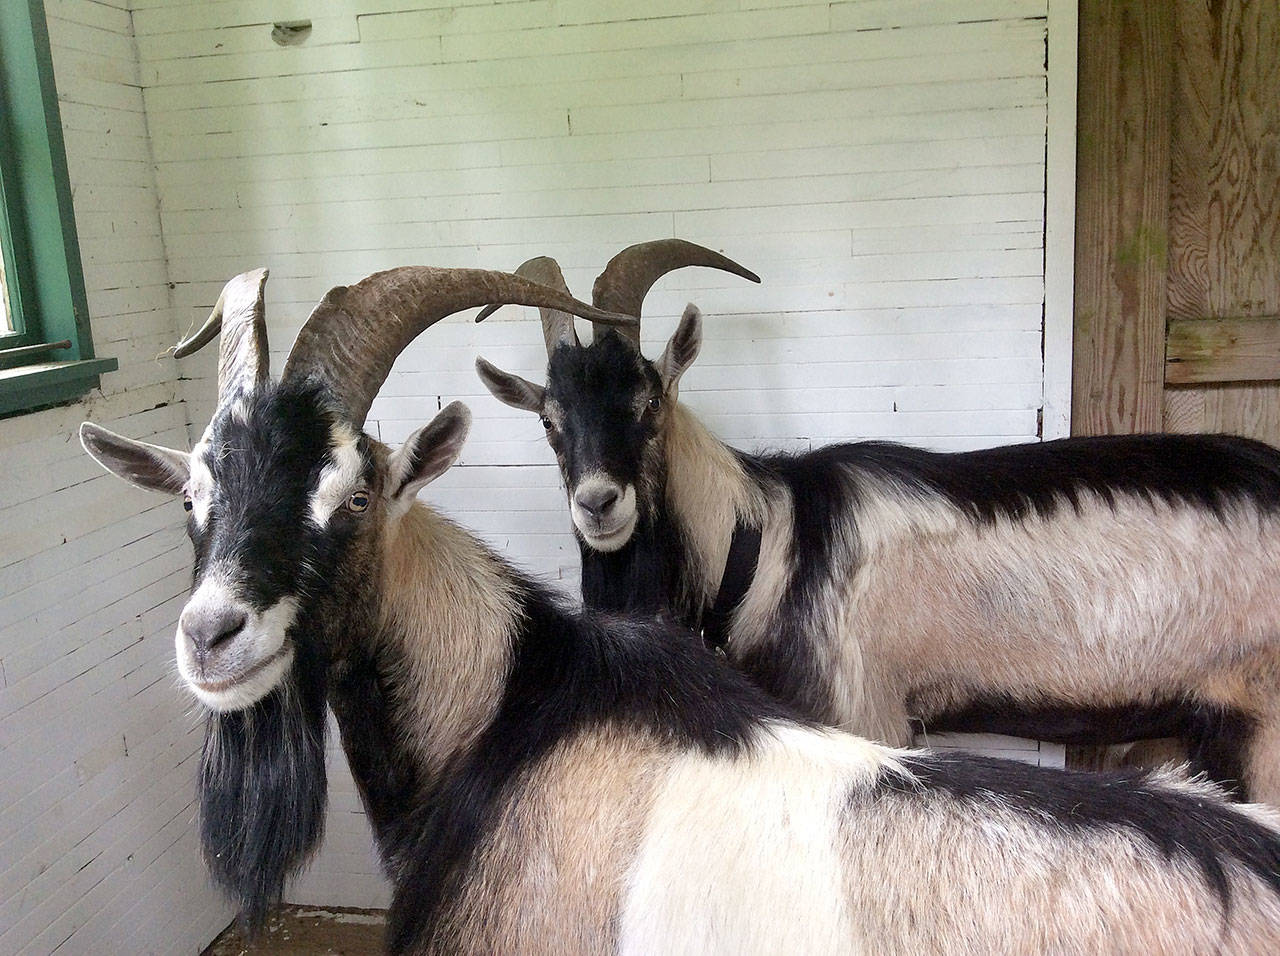 Loose goats were found on South Whidbey.